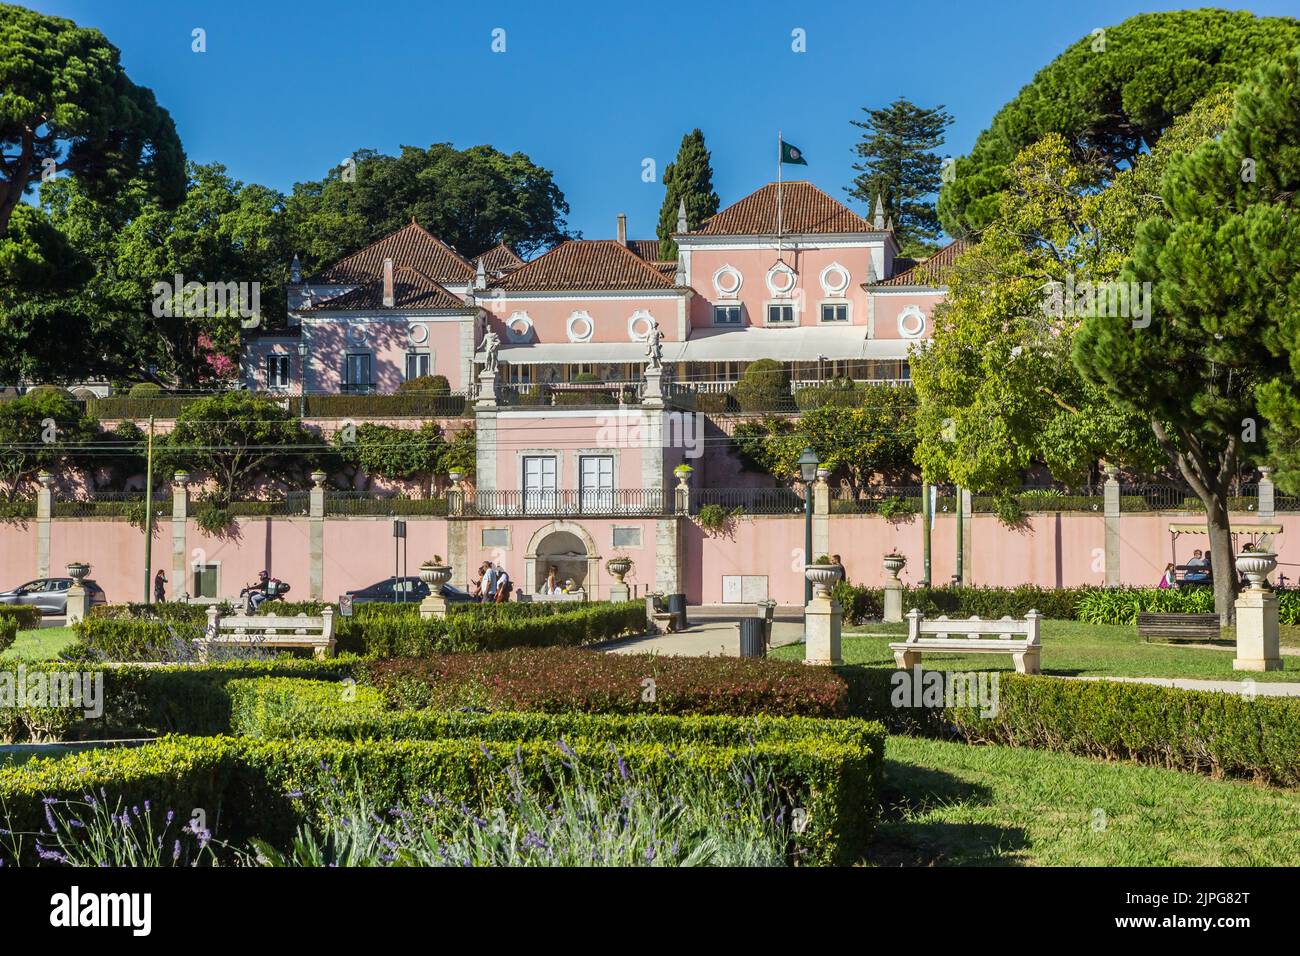 Garden in front of the Belem Palace in Lisbon, Portugal Stock Photo